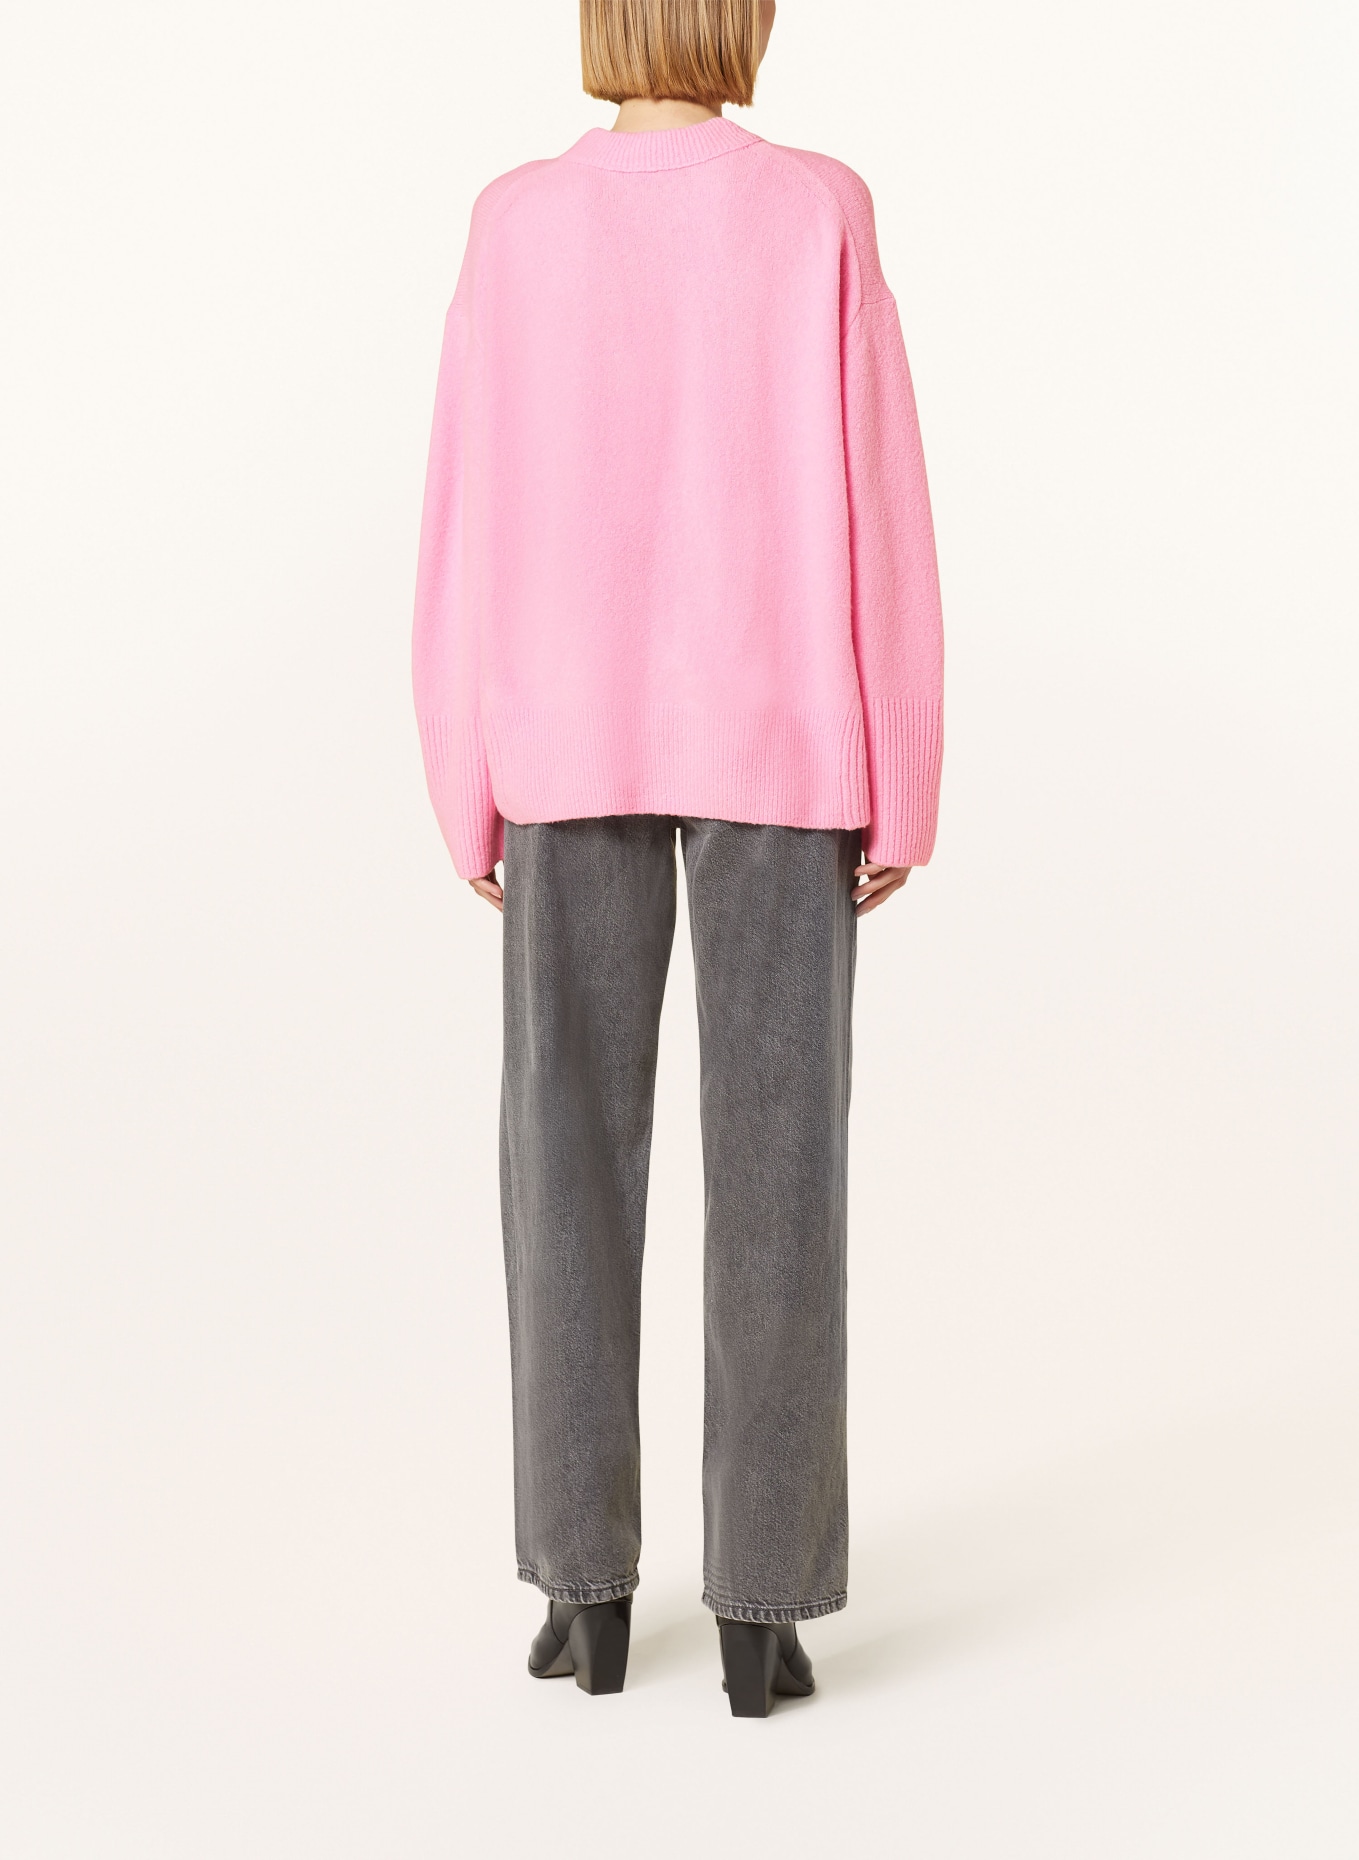 WHISTLES Pullover, Farbe: PINK (Bild 3)